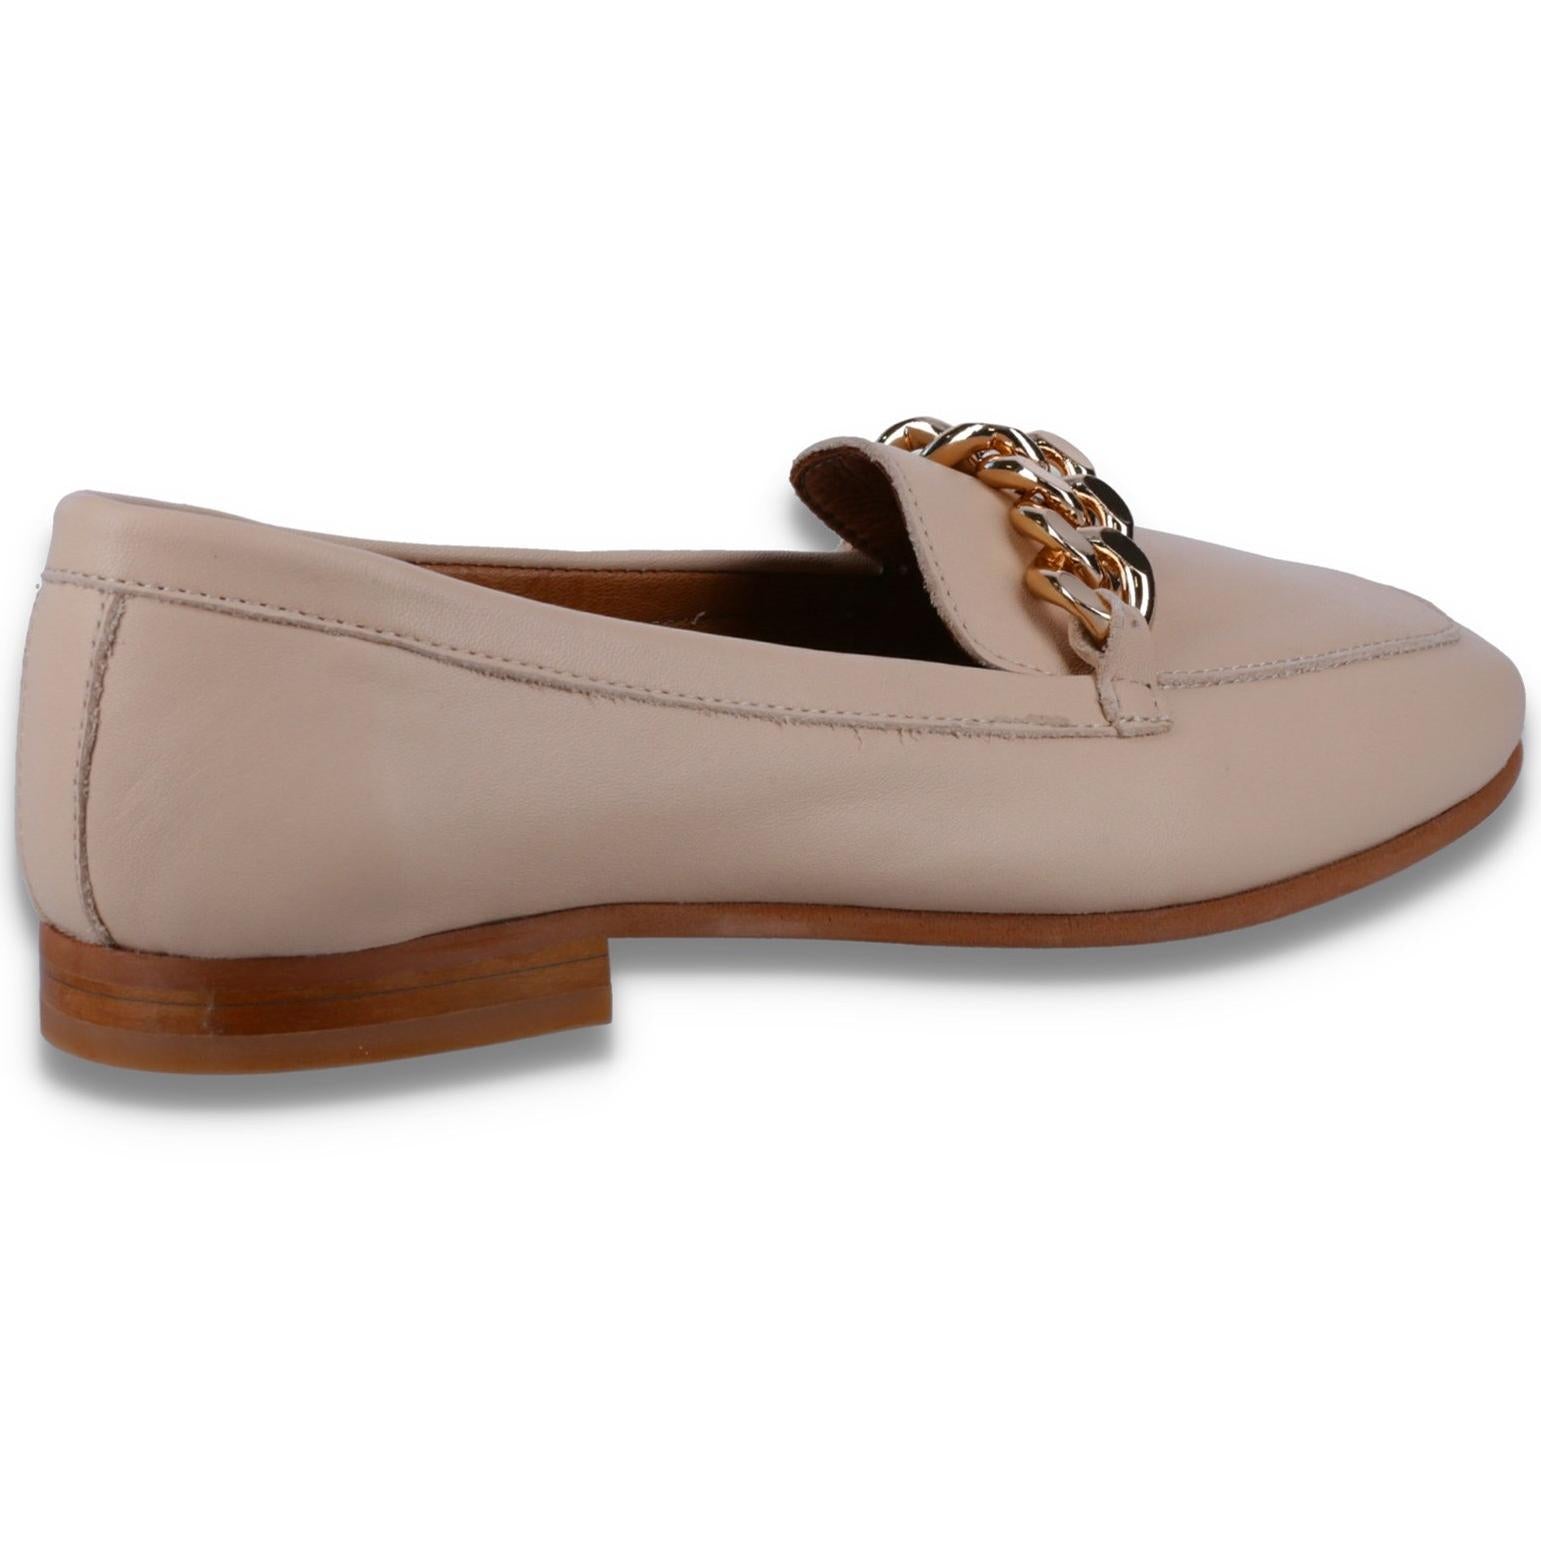 Dune Goldsmith Loafers Flats